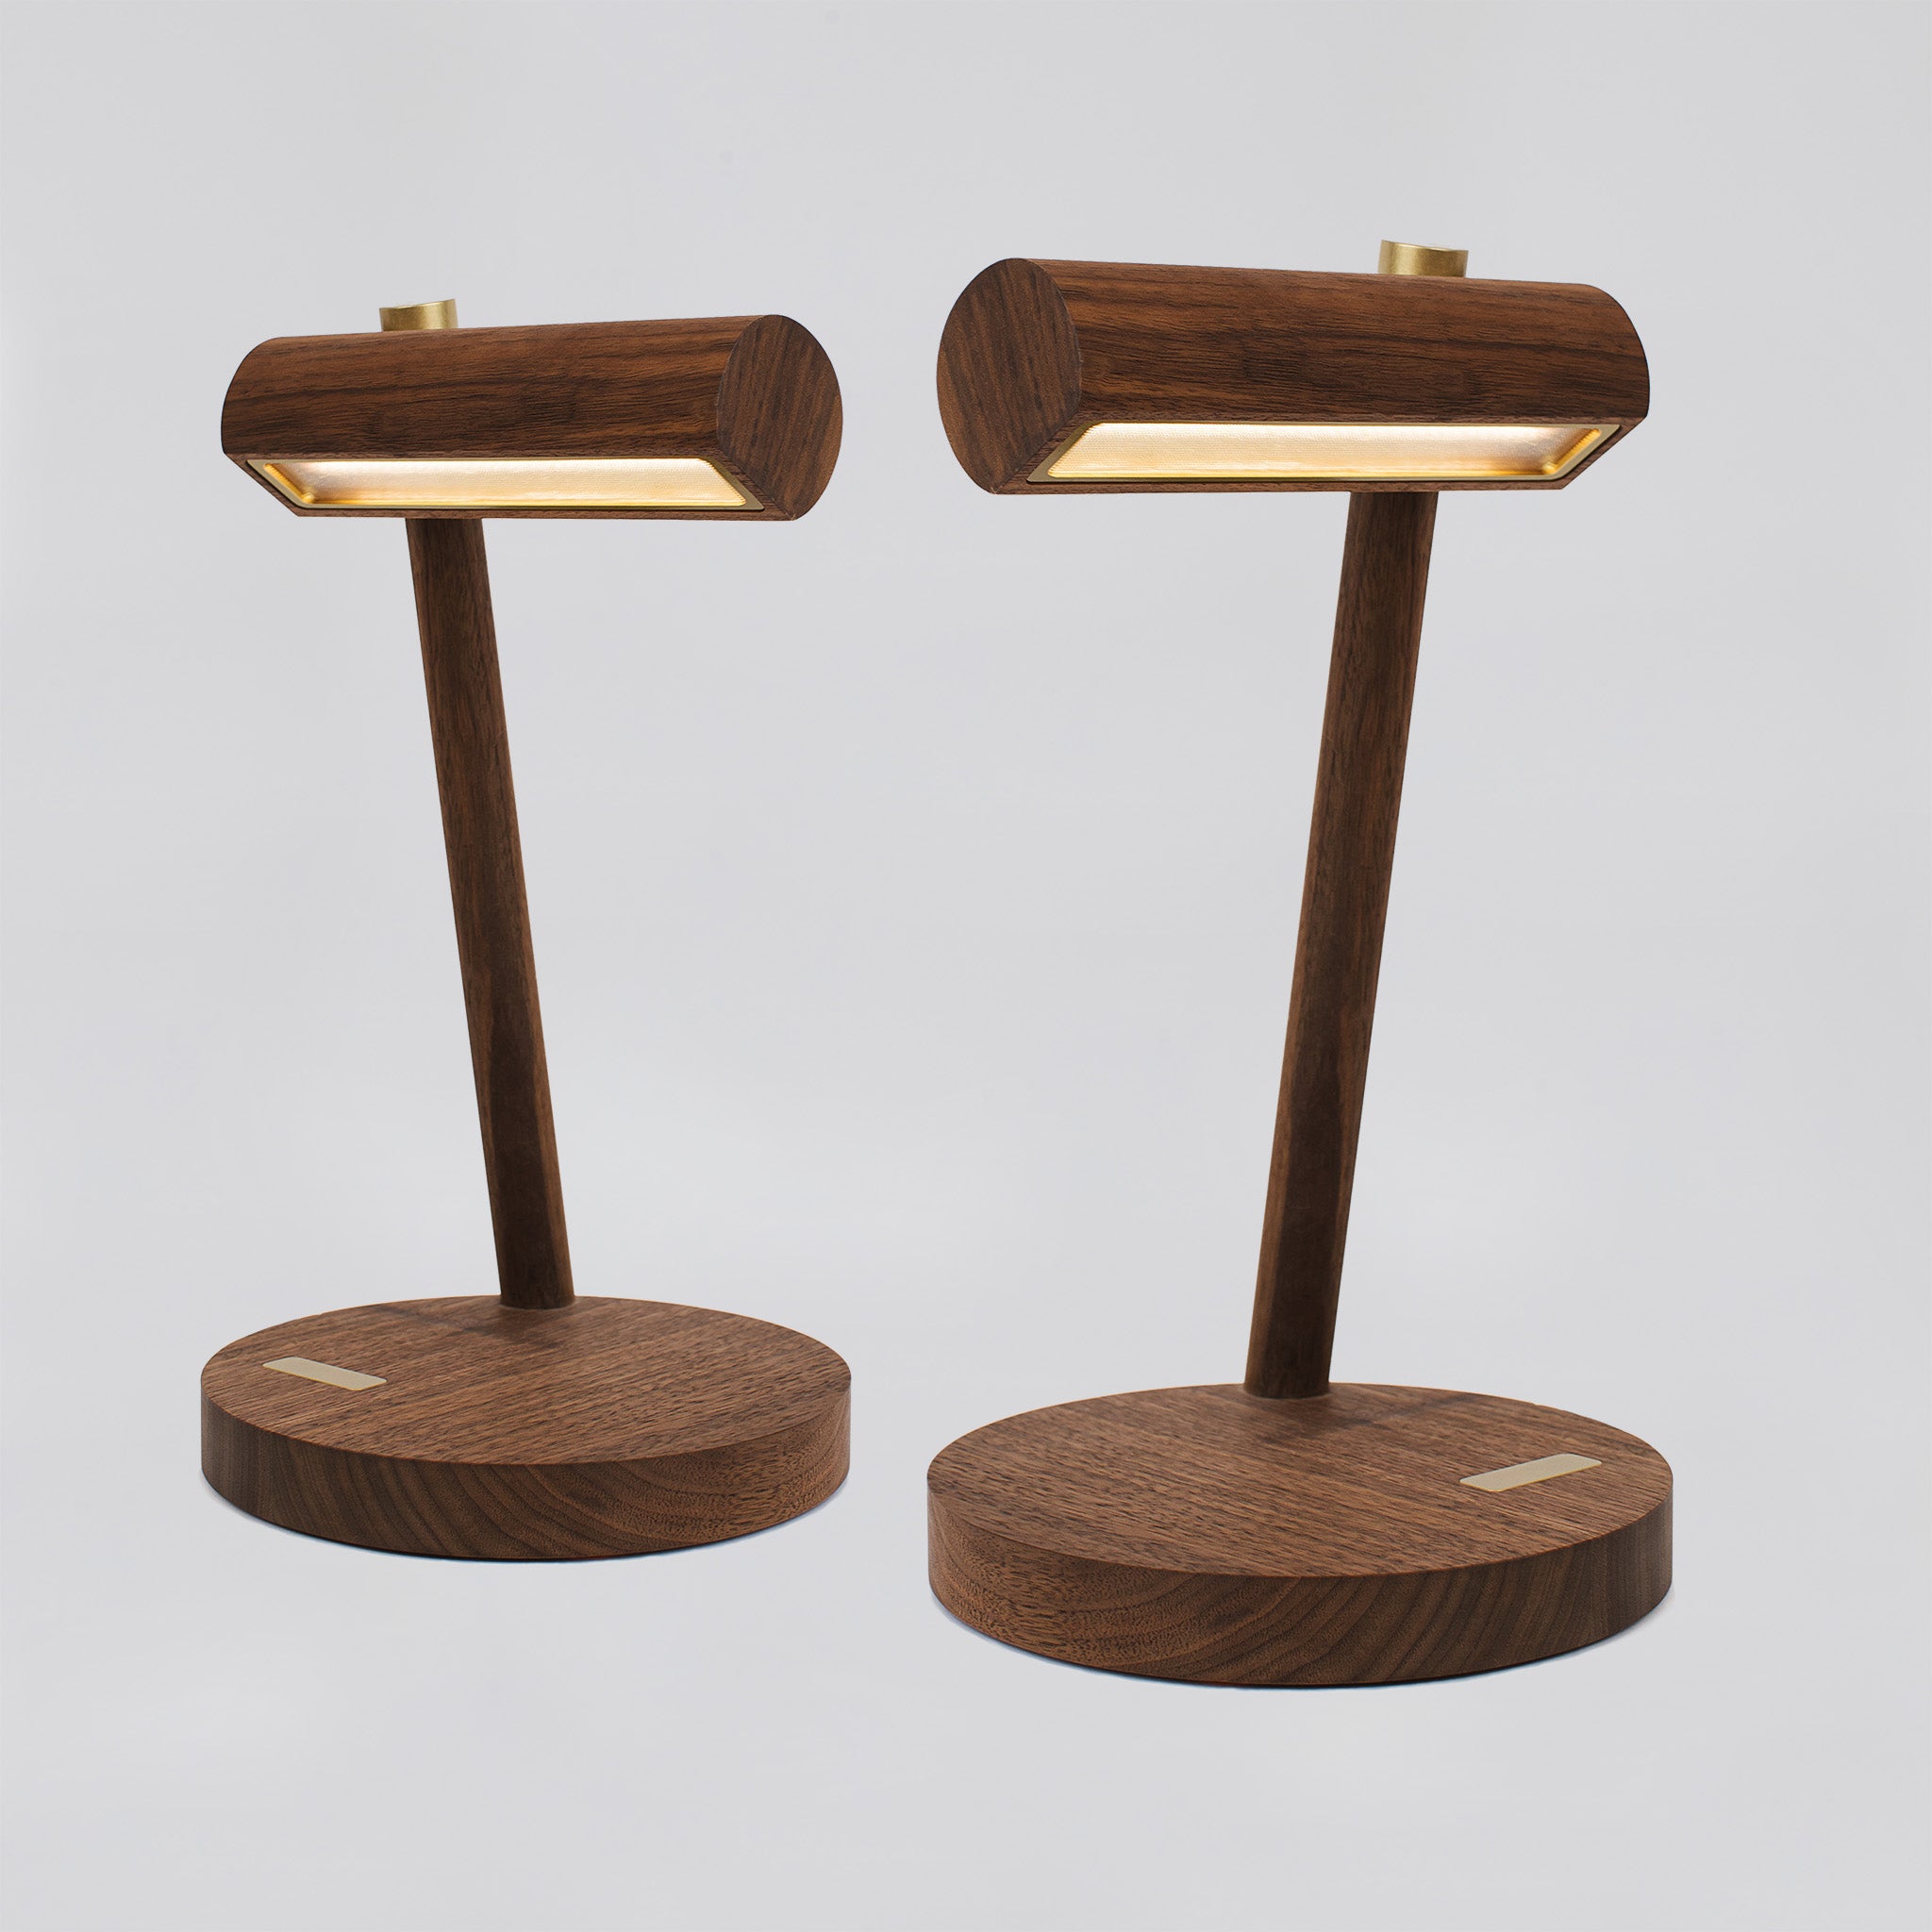 Matching pair of walnut table lamps -walnut